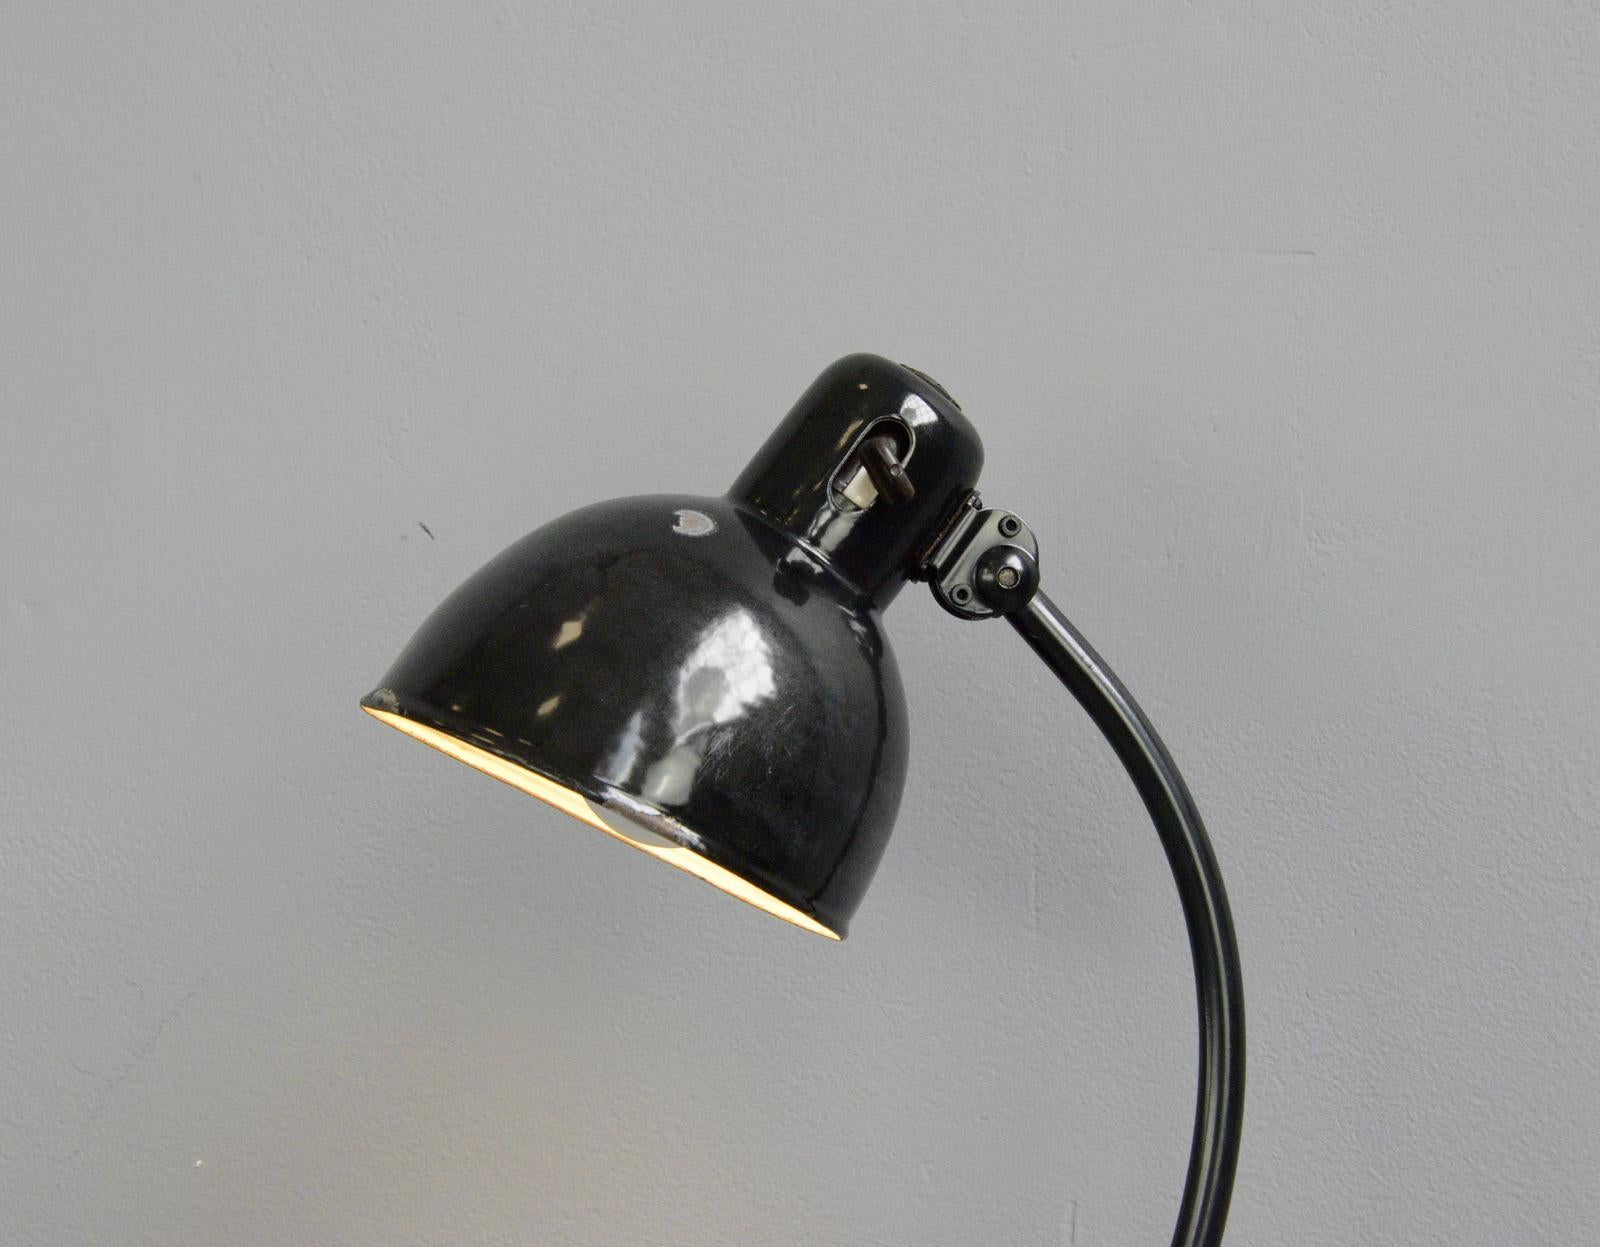 Zirax table lamp by Schneider, circa 1930s

- Vitreous black enamel shade
- Original On/Off toggle switch on the shade
- Stepped cast iron base
- Adjustable shade and arm
- Takes E27 fitting bulbs
- Produced by Dr. Ing. Schneider & Co,